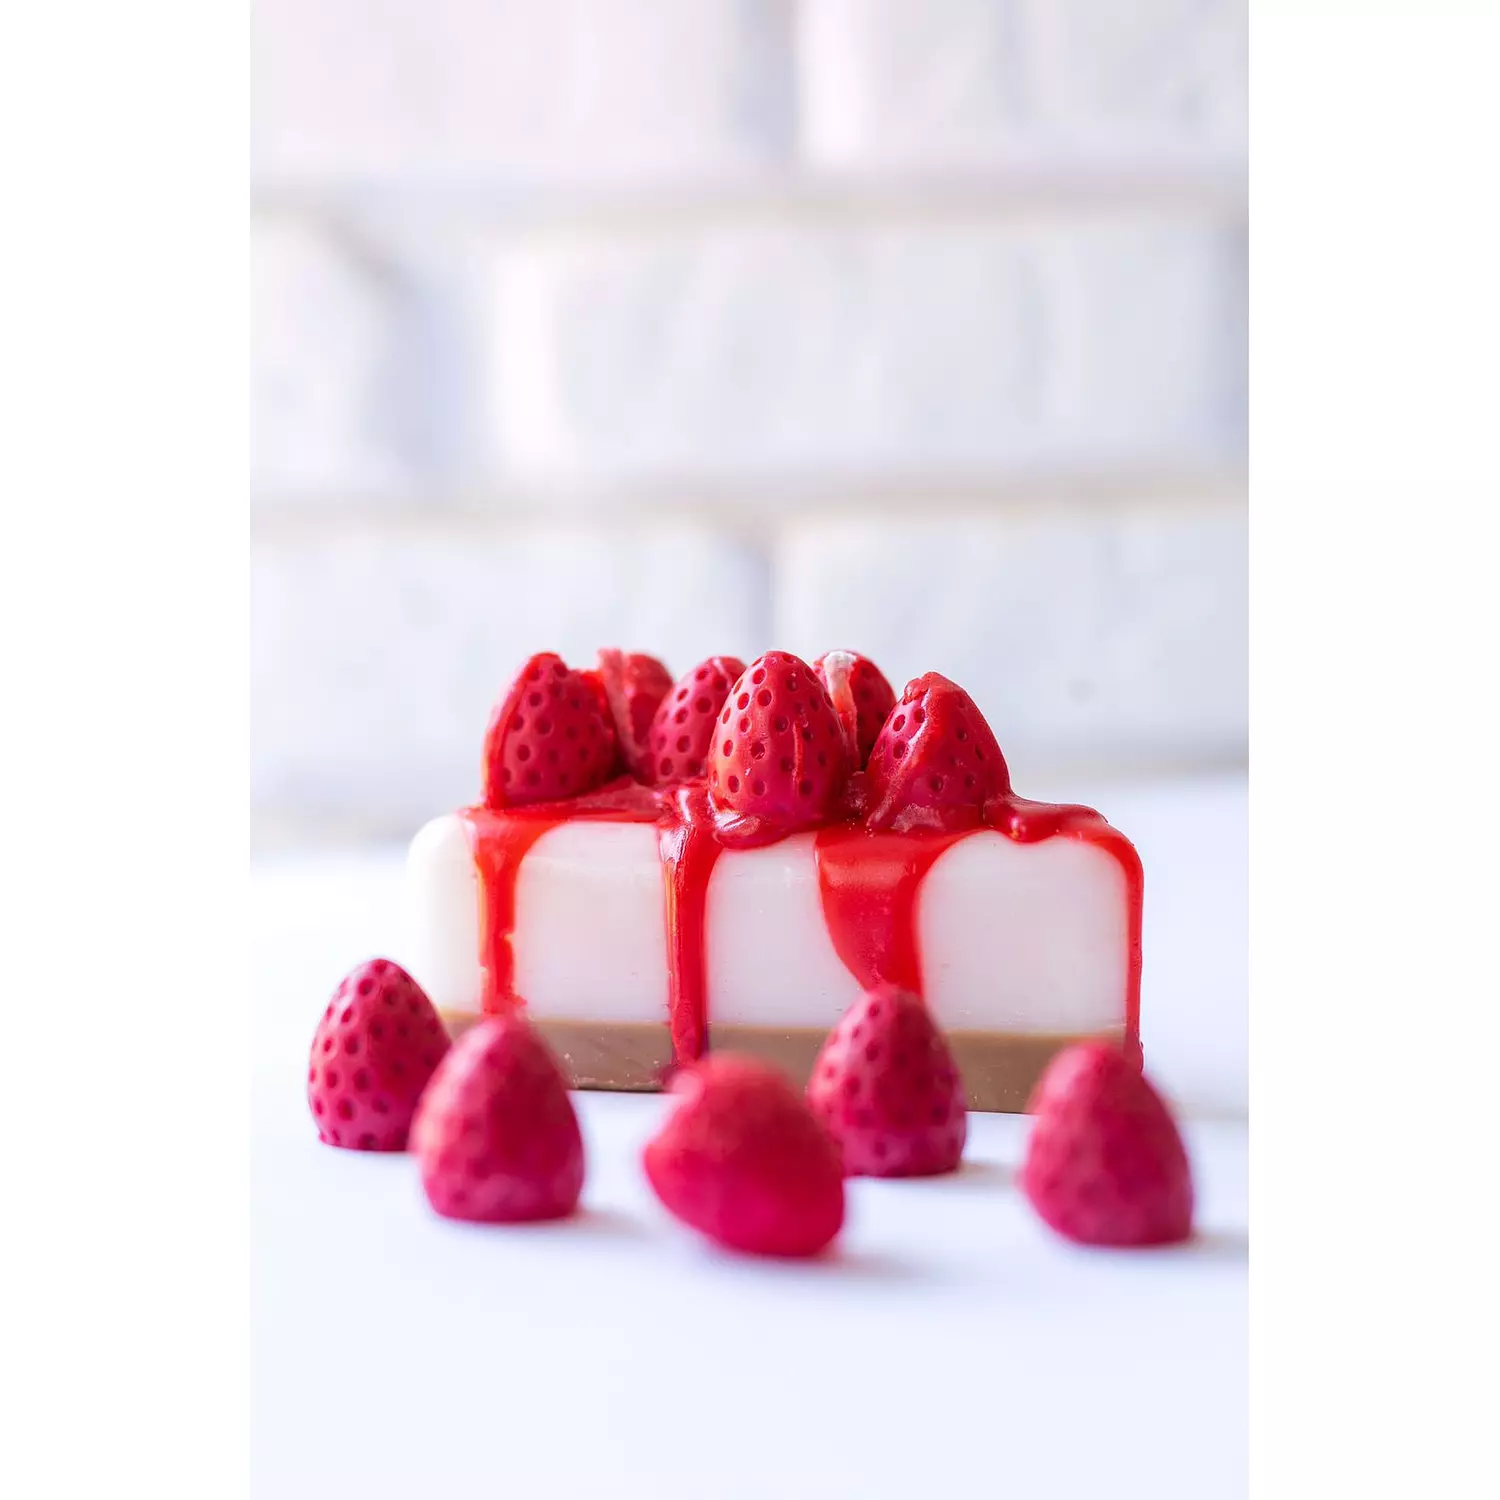 Cheesecake Candle hover image